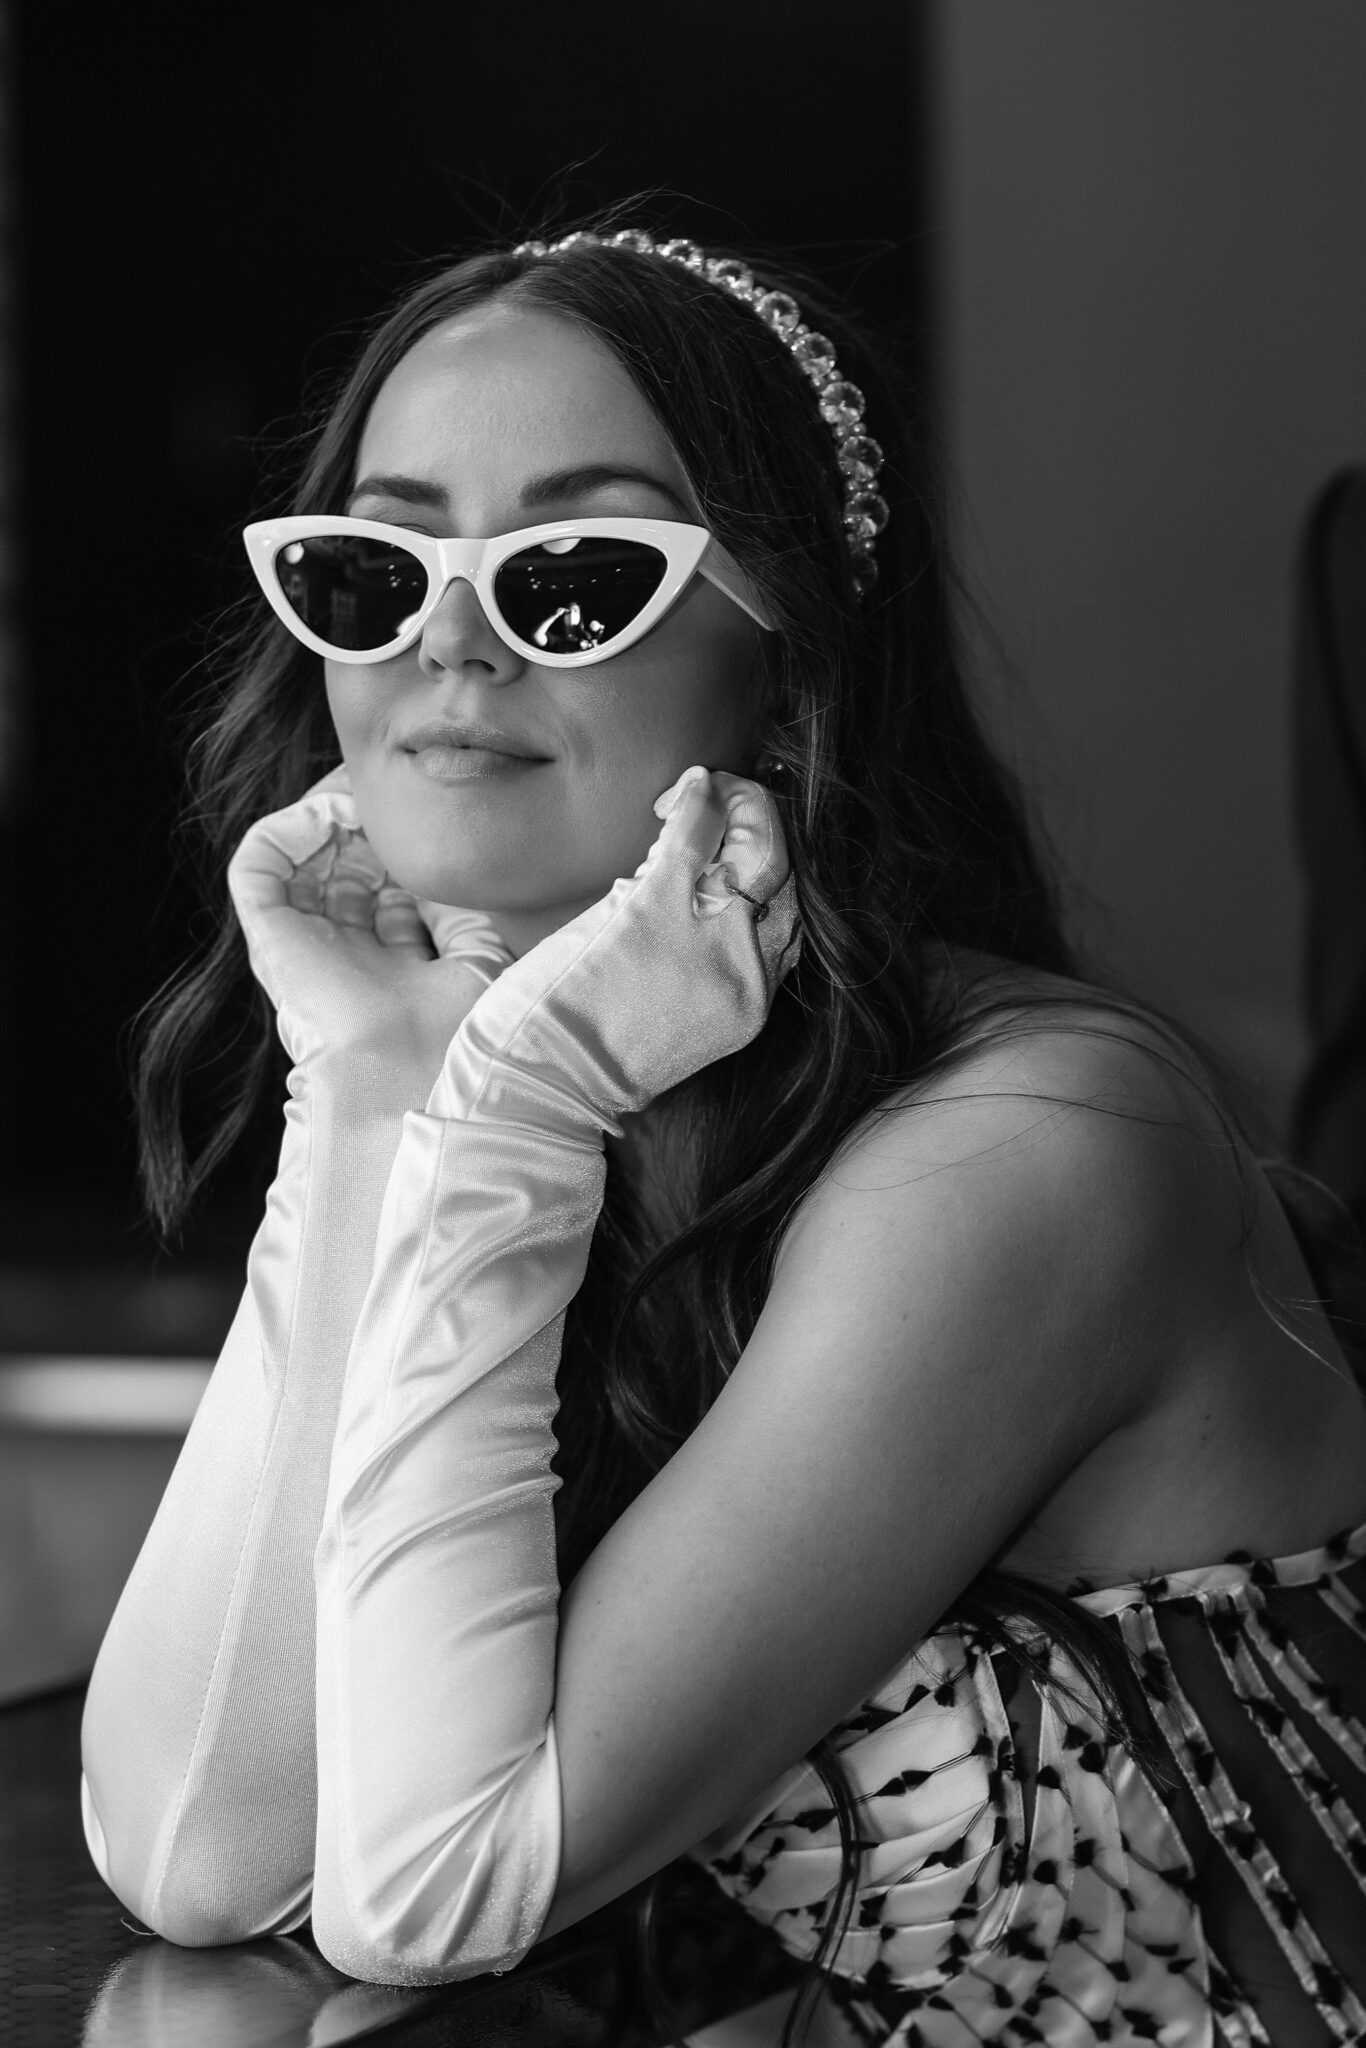 Chic stylish bride wearing retro sunglasses during bold modern wedding with retro styles with eye-catching accents.